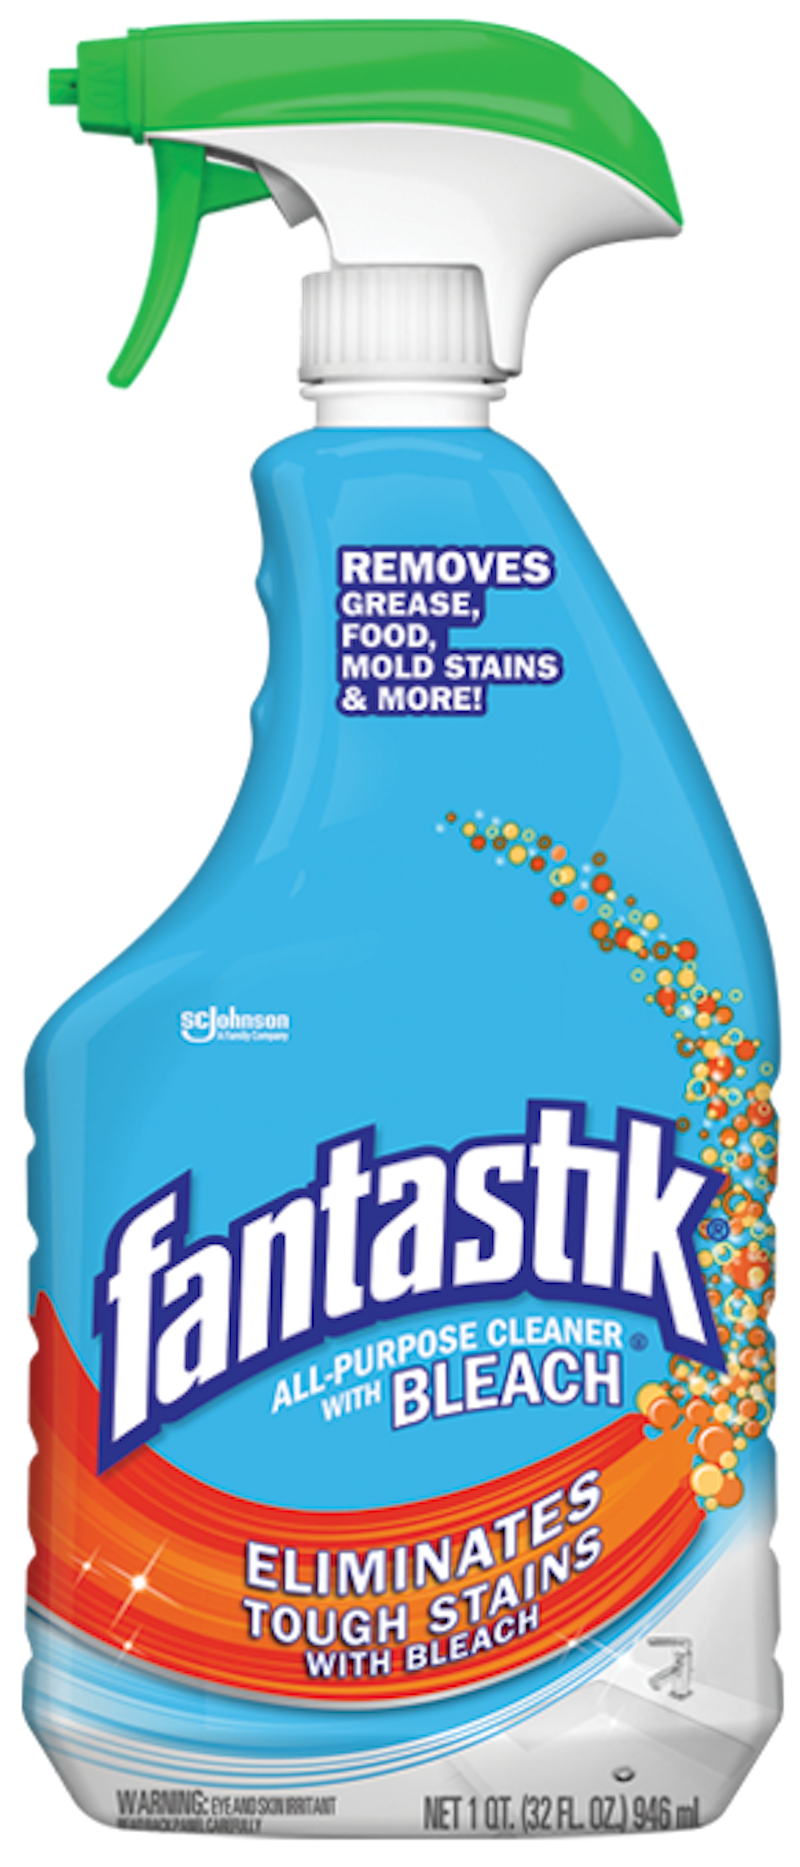 Fantastik All Purpose Cleaner with Bleach